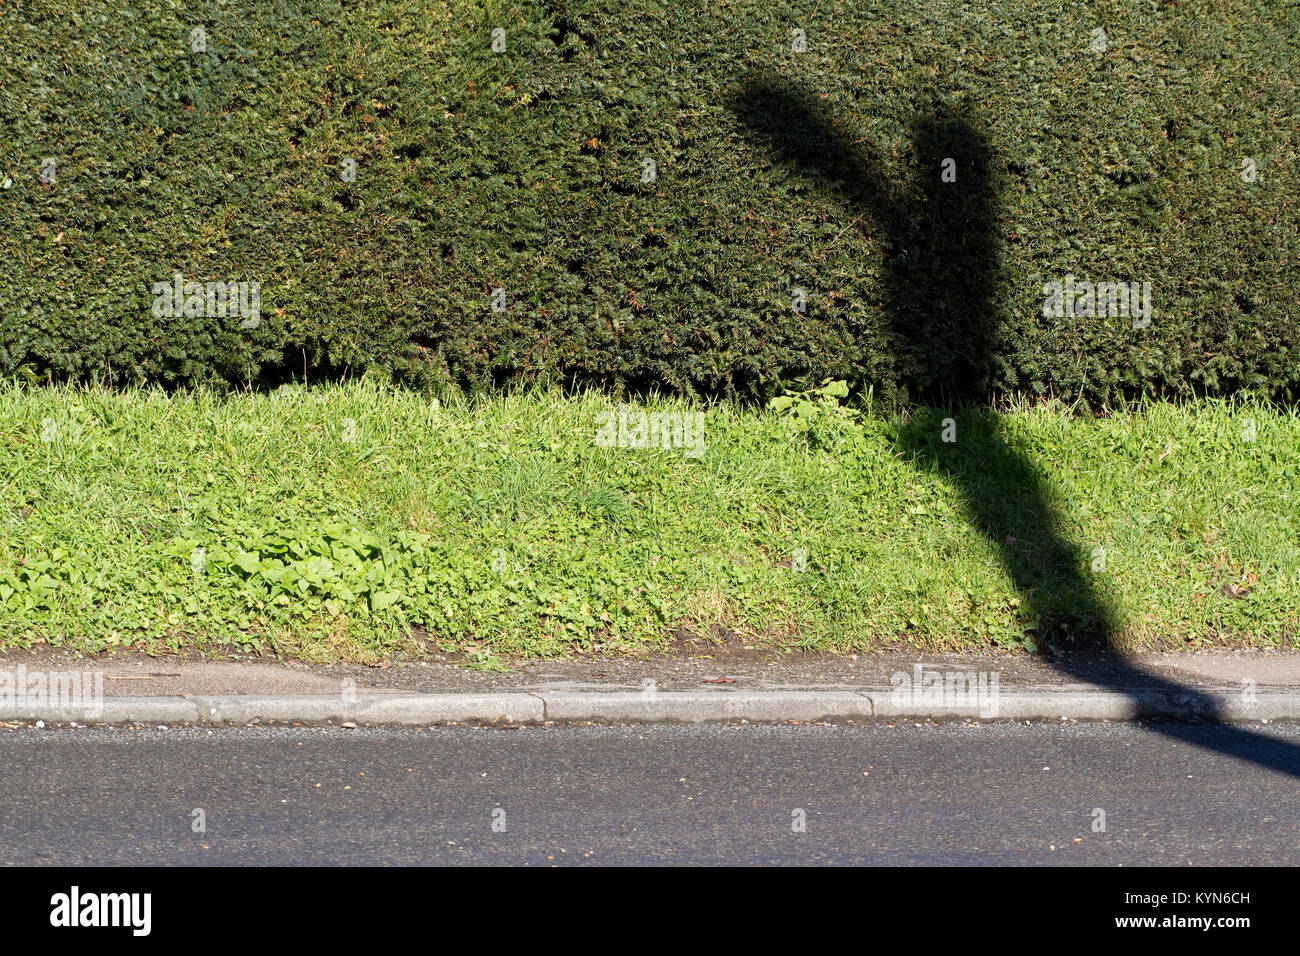 Odd shaped shadow being cast by a street light on a hedge and grass verge Stock Photo